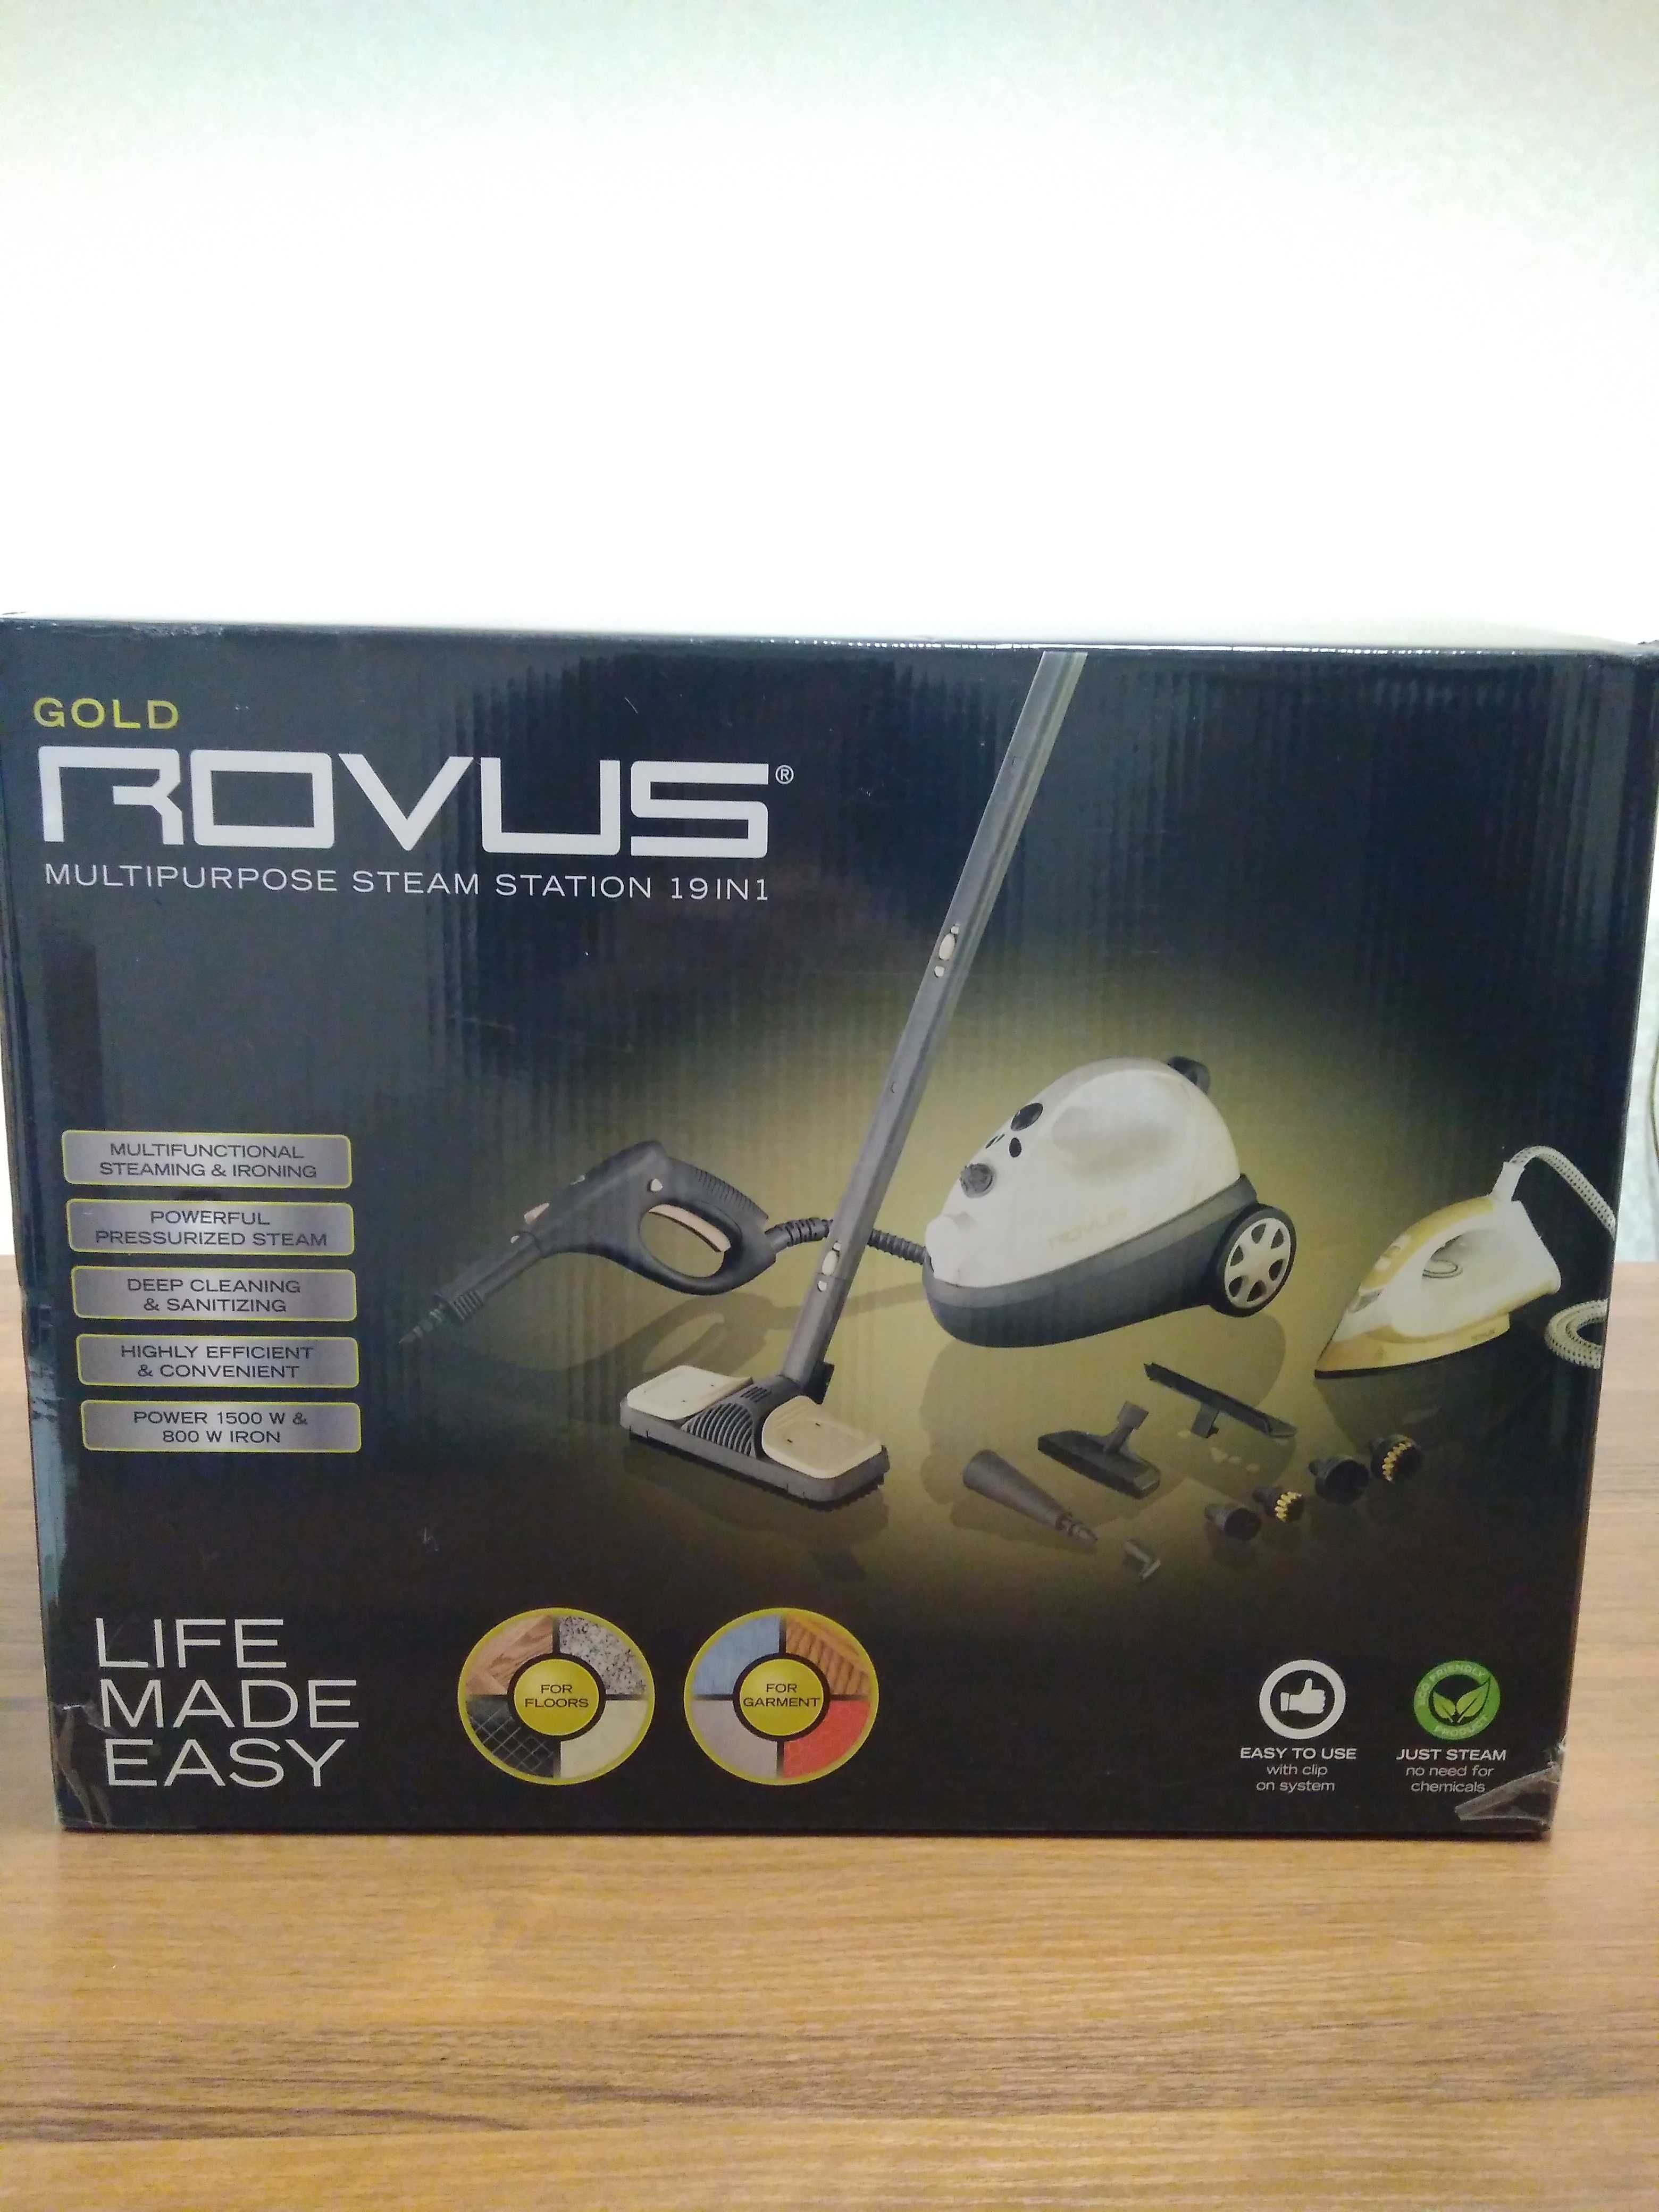 Gold rovus multipurpose steam station 19 in 1 фото 3